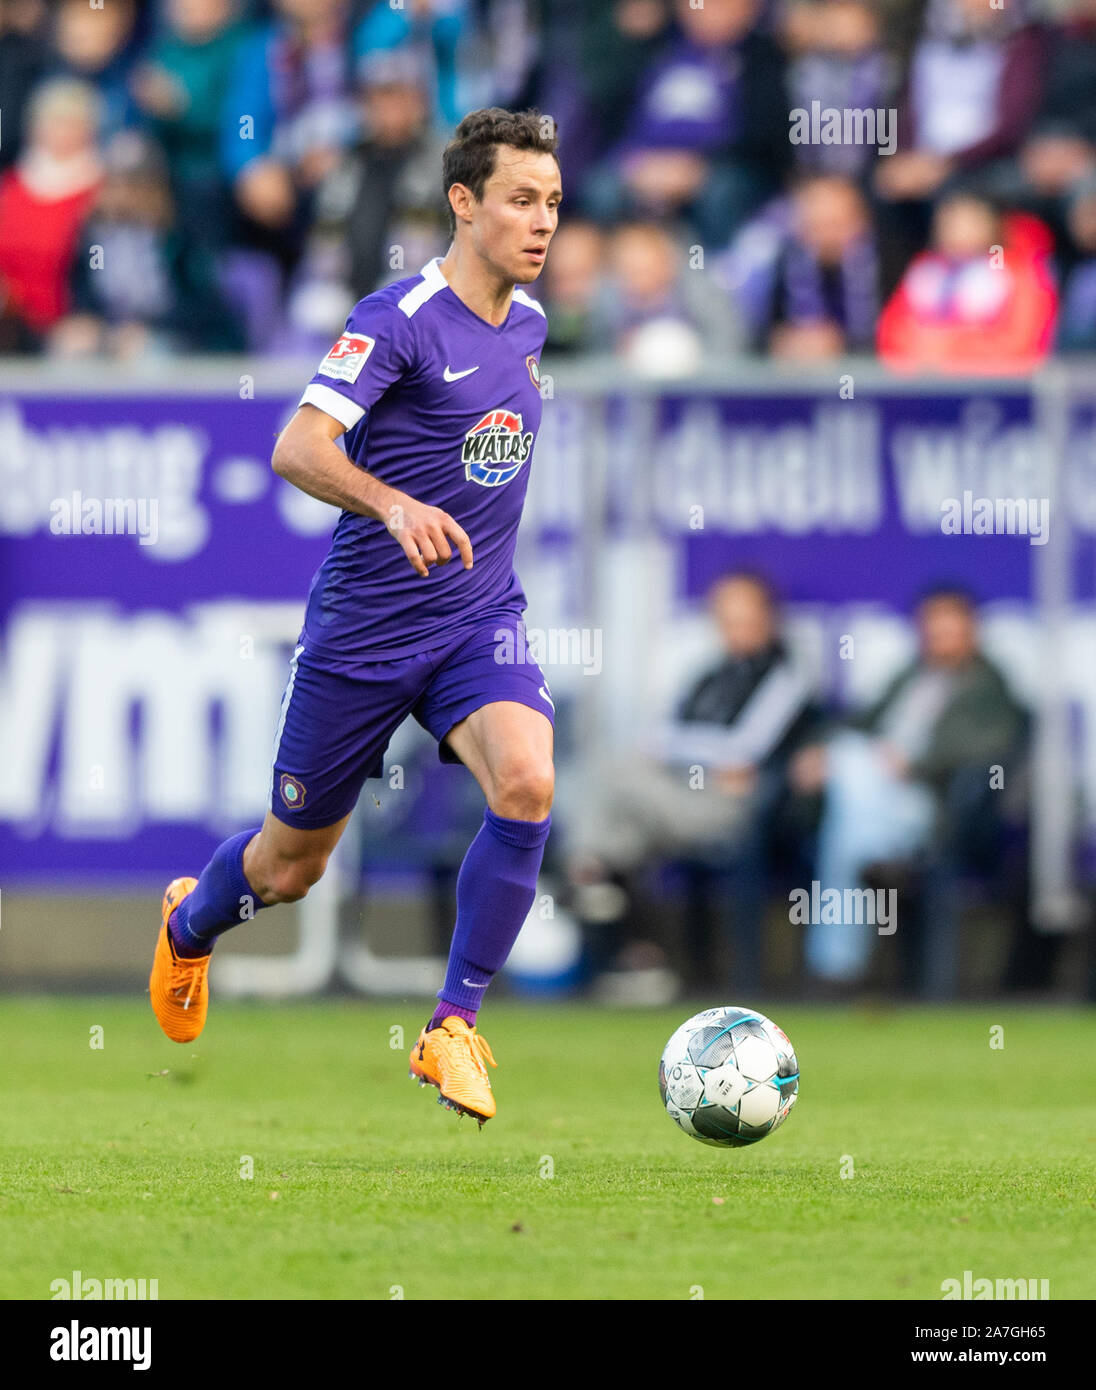 Aue, Germany. 02nd Nov, 2019. Soccer: 2nd Bundesliga, FC Erzgebirge Aue - 1st FC Heidenheim, 12th matchday, in the Sparkassen-Erzgebirgsstadion. Clemens Fandrich plays the ball. Credit: Robert Michael/dpa-Zentralbild/dpa - IMPORTANT NOTE: In accordance with the requirements of the DFL Deutsche Fußball Liga or the DFB Deutscher Fußball-Bund, it is prohibited to use or have used photographs taken in the stadium and/or the match in the form of sequence images and/or video-like photo sequences./dpa/Alamy Live News Stock Photo